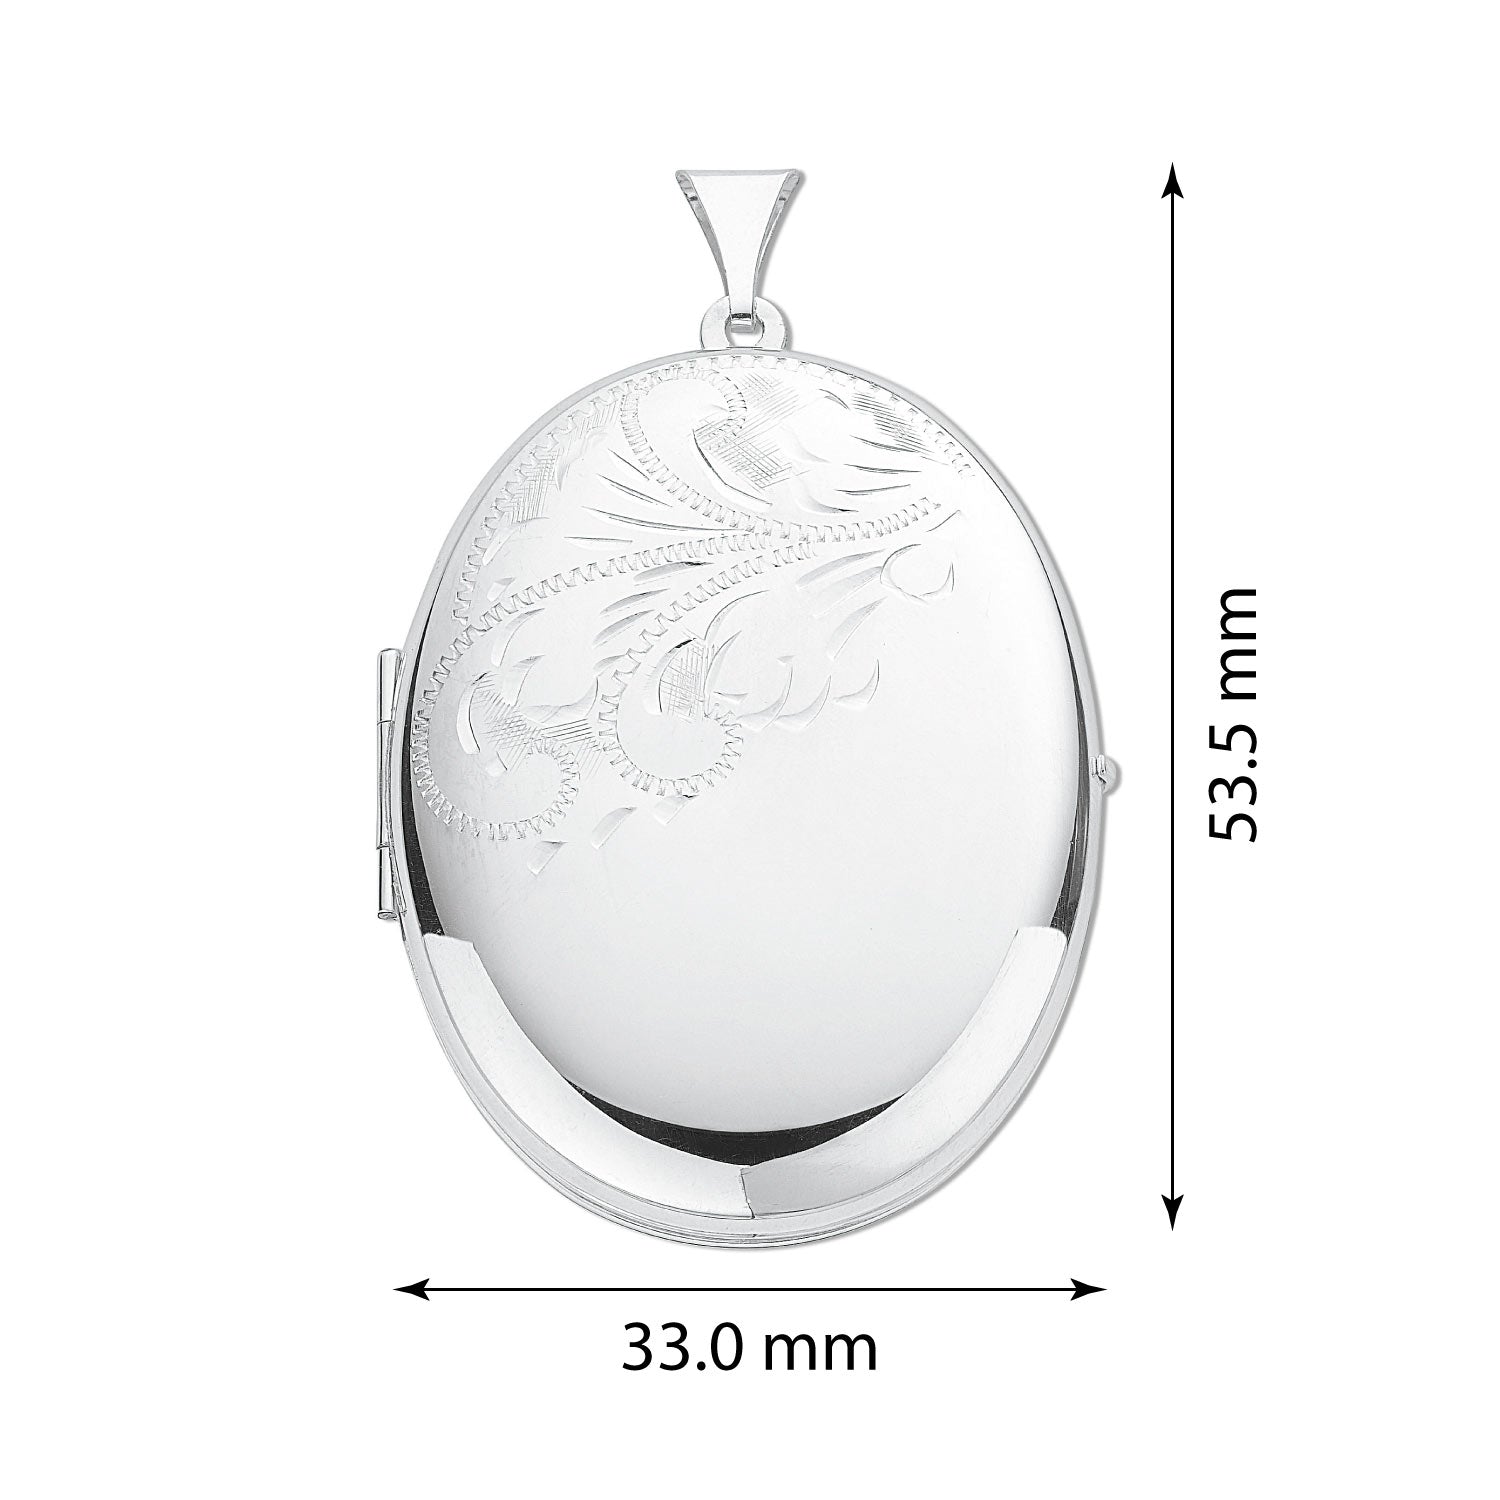 925 Sterling Silver Large Engraved Oval Locket - FJewellery